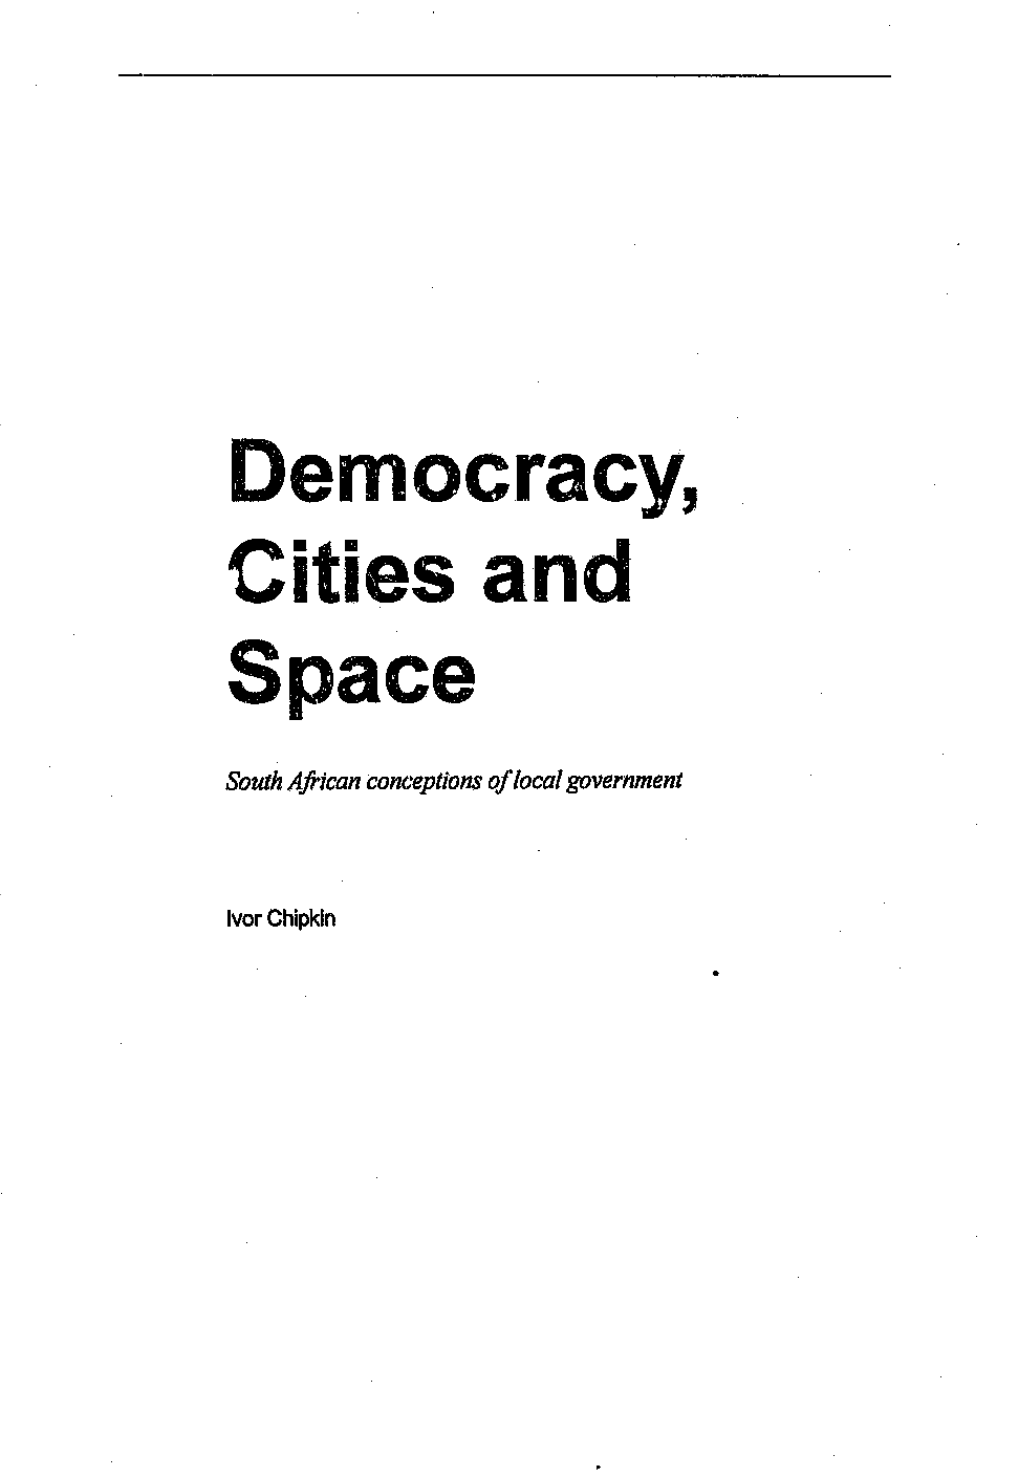 Democracy, Cities and Space